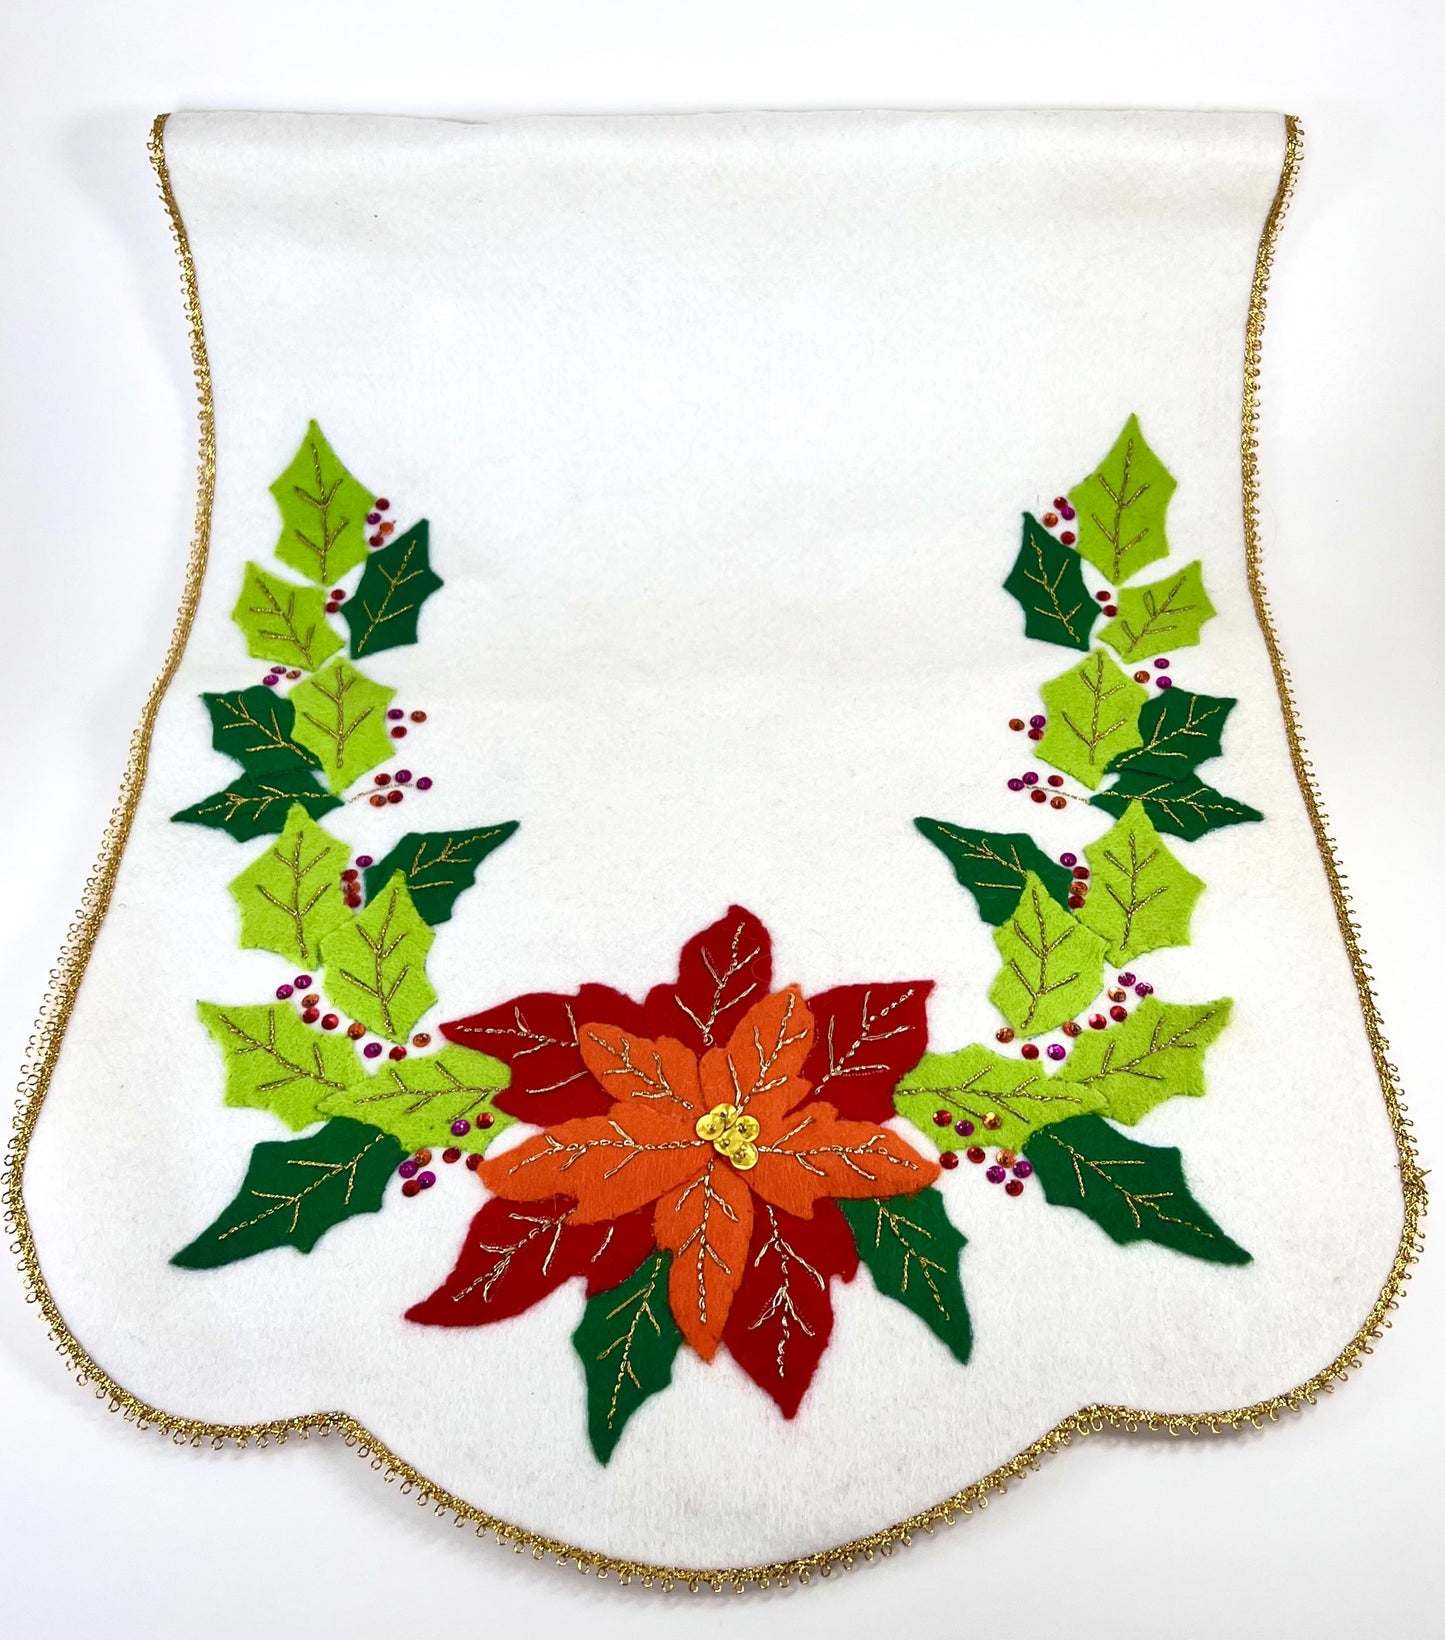 Christmas Table Runner, Hand-crafted Felt with Poinsettia and Holly Embellishments